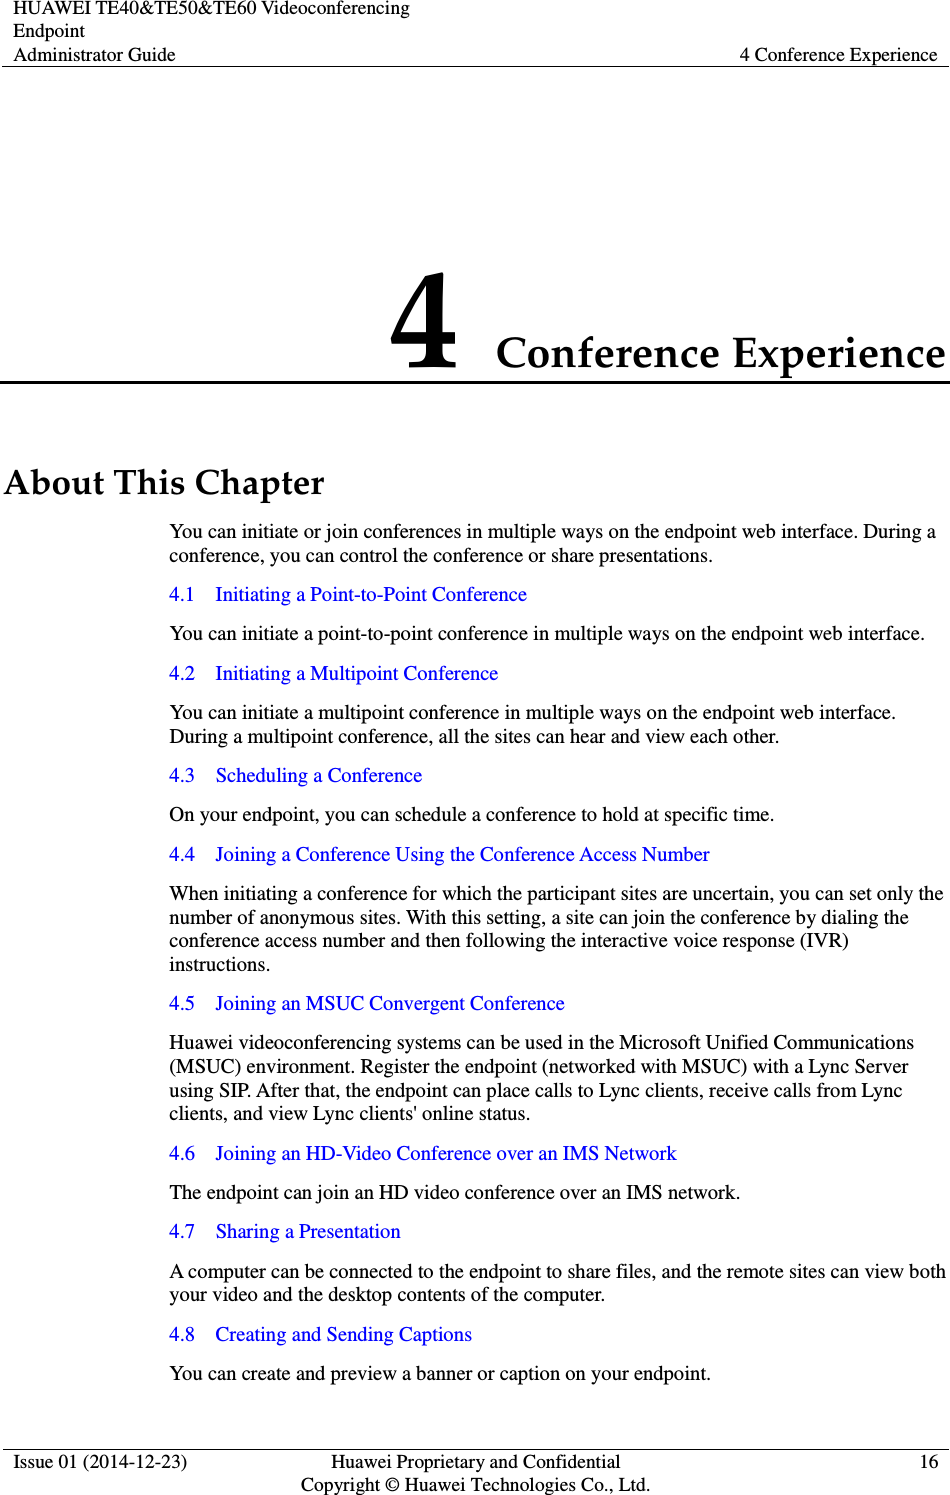 HUAWEI TE40&amp;TE50&amp;TE60 Videoconferencing Endpoint Administrator Guide  4 Conference Experience  Issue 01 (2014-12-23)  Huawei Proprietary and Confidential                                     Copyright © Huawei Technologies Co., Ltd. 16  4 Conference Experience About This Chapter You can initiate or join conferences in multiple ways on the endpoint web interface. During a conference, you can control the conference or share presentations. 4.1    Initiating a Point-to-Point Conference You can initiate a point-to-point conference in multiple ways on the endpoint web interface.   4.2    Initiating a Multipoint Conference You can initiate a multipoint conference in multiple ways on the endpoint web interface. During a multipoint conference, all the sites can hear and view each other. 4.3    Scheduling a Conference On your endpoint, you can schedule a conference to hold at specific time. 4.4    Joining a Conference Using the Conference Access Number When initiating a conference for which the participant sites are uncertain, you can set only the number of anonymous sites. With this setting, a site can join the conference by dialing the conference access number and then following the interactive voice response (IVR) instructions.   4.5    Joining an MSUC Convergent Conference Huawei videoconferencing systems can be used in the Microsoft Unified Communications (MSUC) environment. Register the endpoint (networked with MSUC) with a Lync Server using SIP. After that, the endpoint can place calls to Lync clients, receive calls from Lync clients, and view Lync clients&apos; online status. 4.6    Joining an HD-Video Conference over an IMS Network The endpoint can join an HD video conference over an IMS network. 4.7    Sharing a Presentation A computer can be connected to the endpoint to share files, and the remote sites can view both your video and the desktop contents of the computer. 4.8    Creating and Sending Captions You can create and preview a banner or caption on your endpoint. 